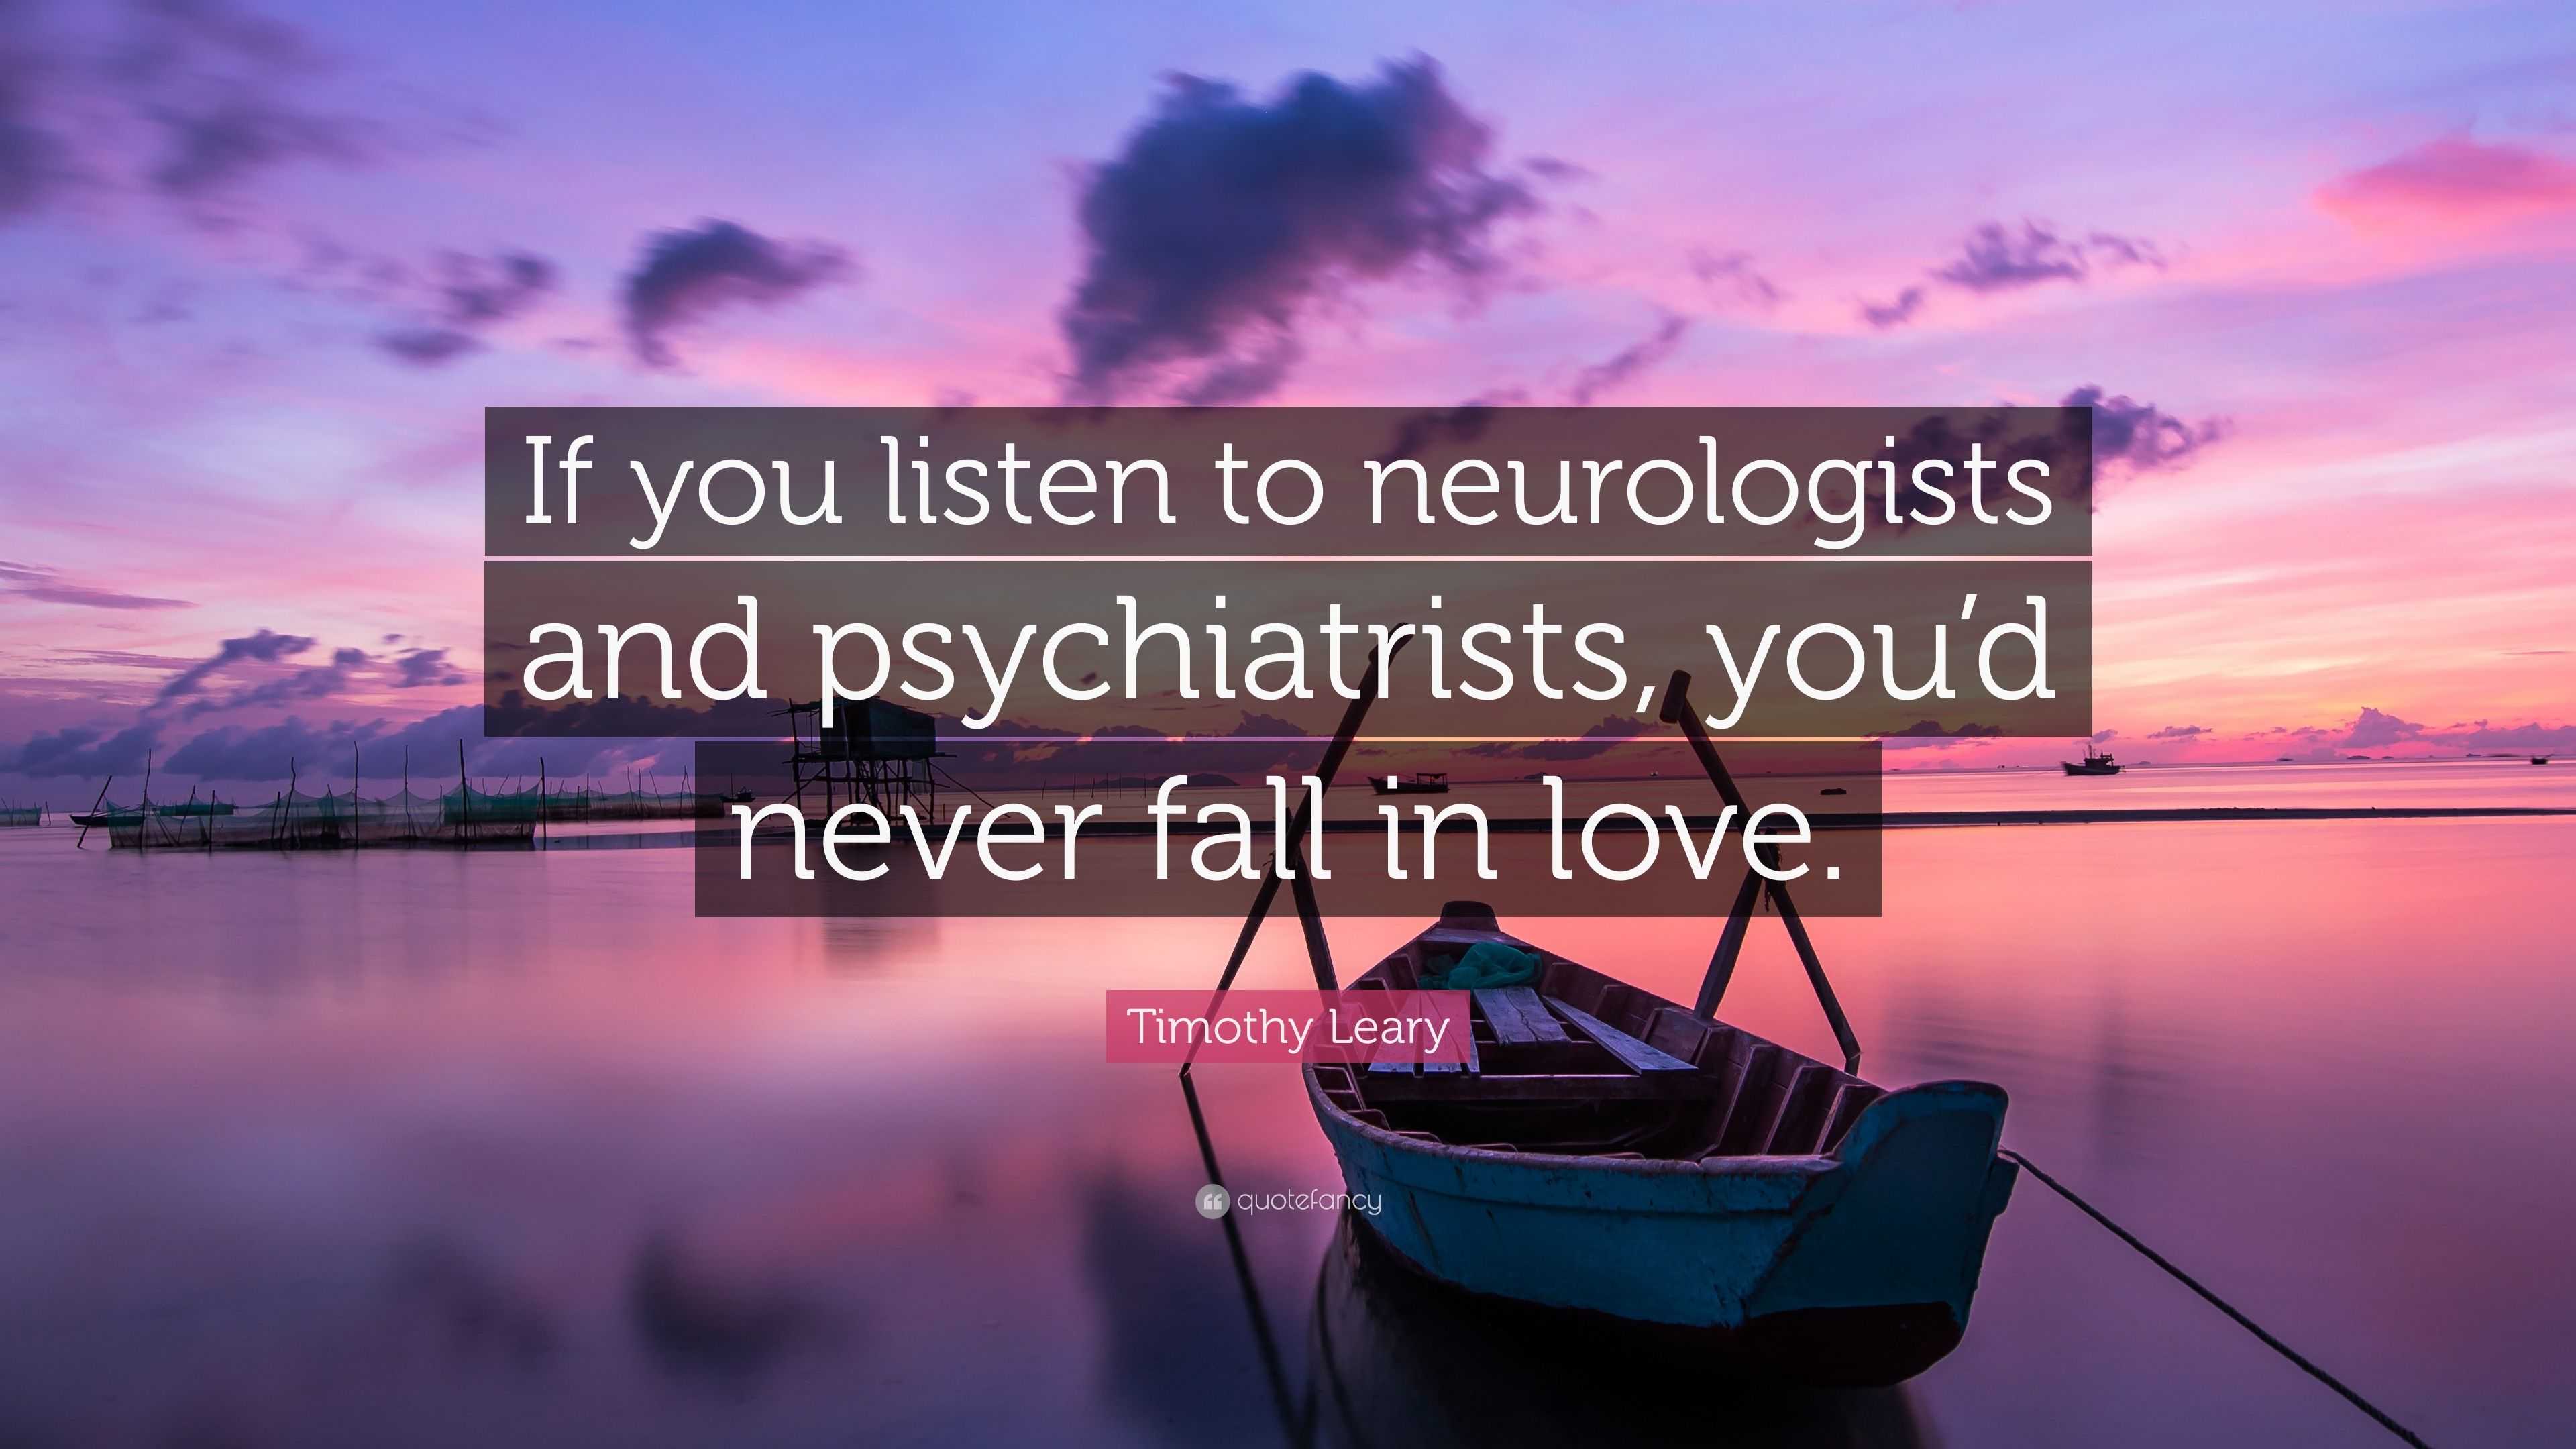 timothy-leary-quote-if-you-listen-to-neurologists-and-psychiatrists-you-d-never-fall-in-love